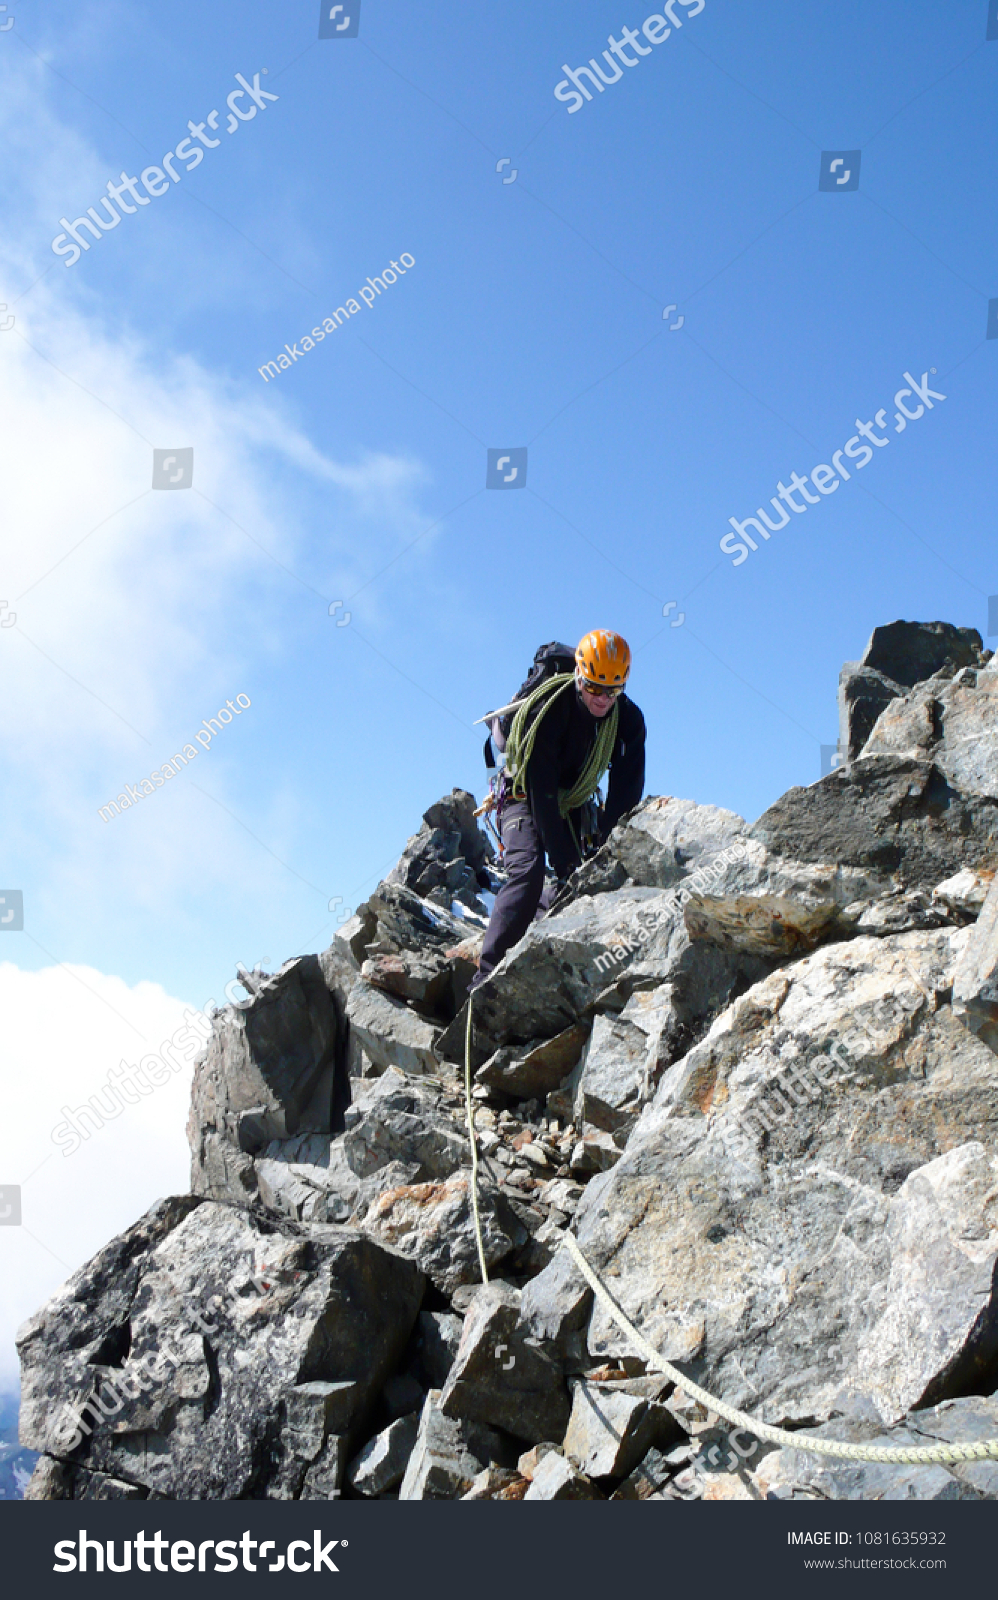 mountain guide on a steep and exposed rocky ridge on his way to a high alpine summit with a client #1081635932